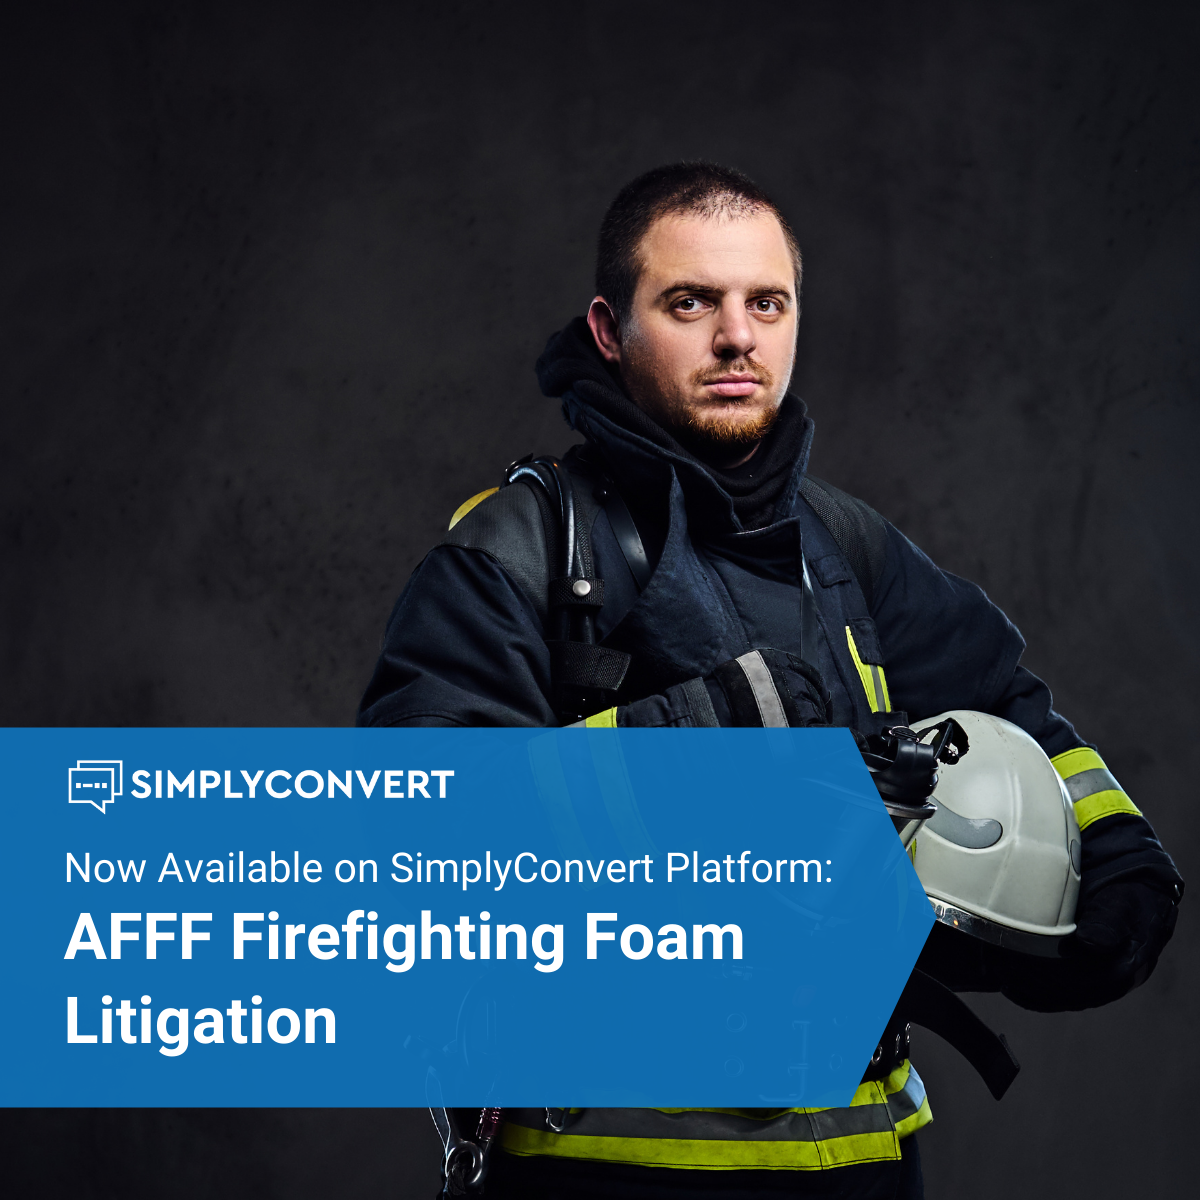 Cancers and serious illnesses have been associated with chemicals in AFFF firefighting foam